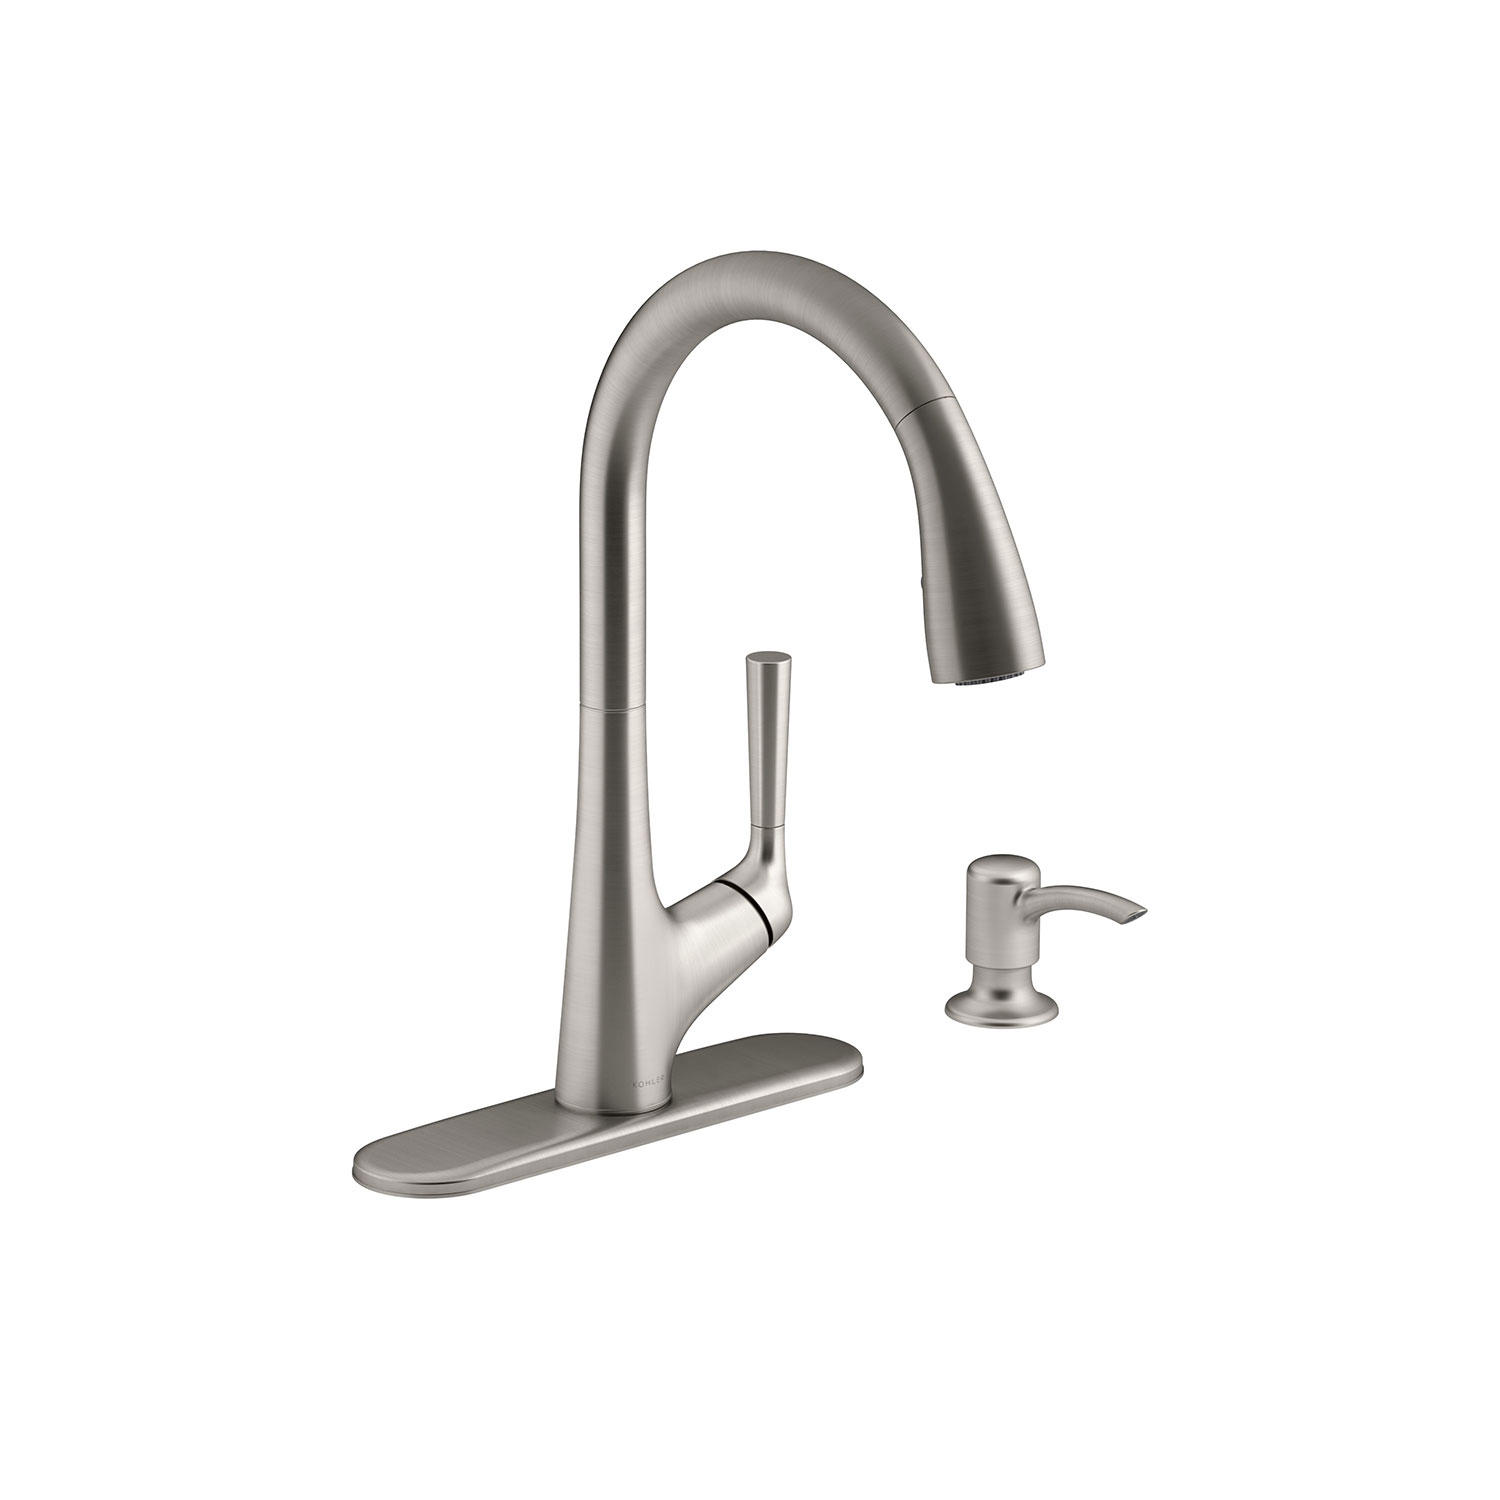 Kohler Malleco Touchless Pull-Down Kitchen Faucet with Soap Dispenser